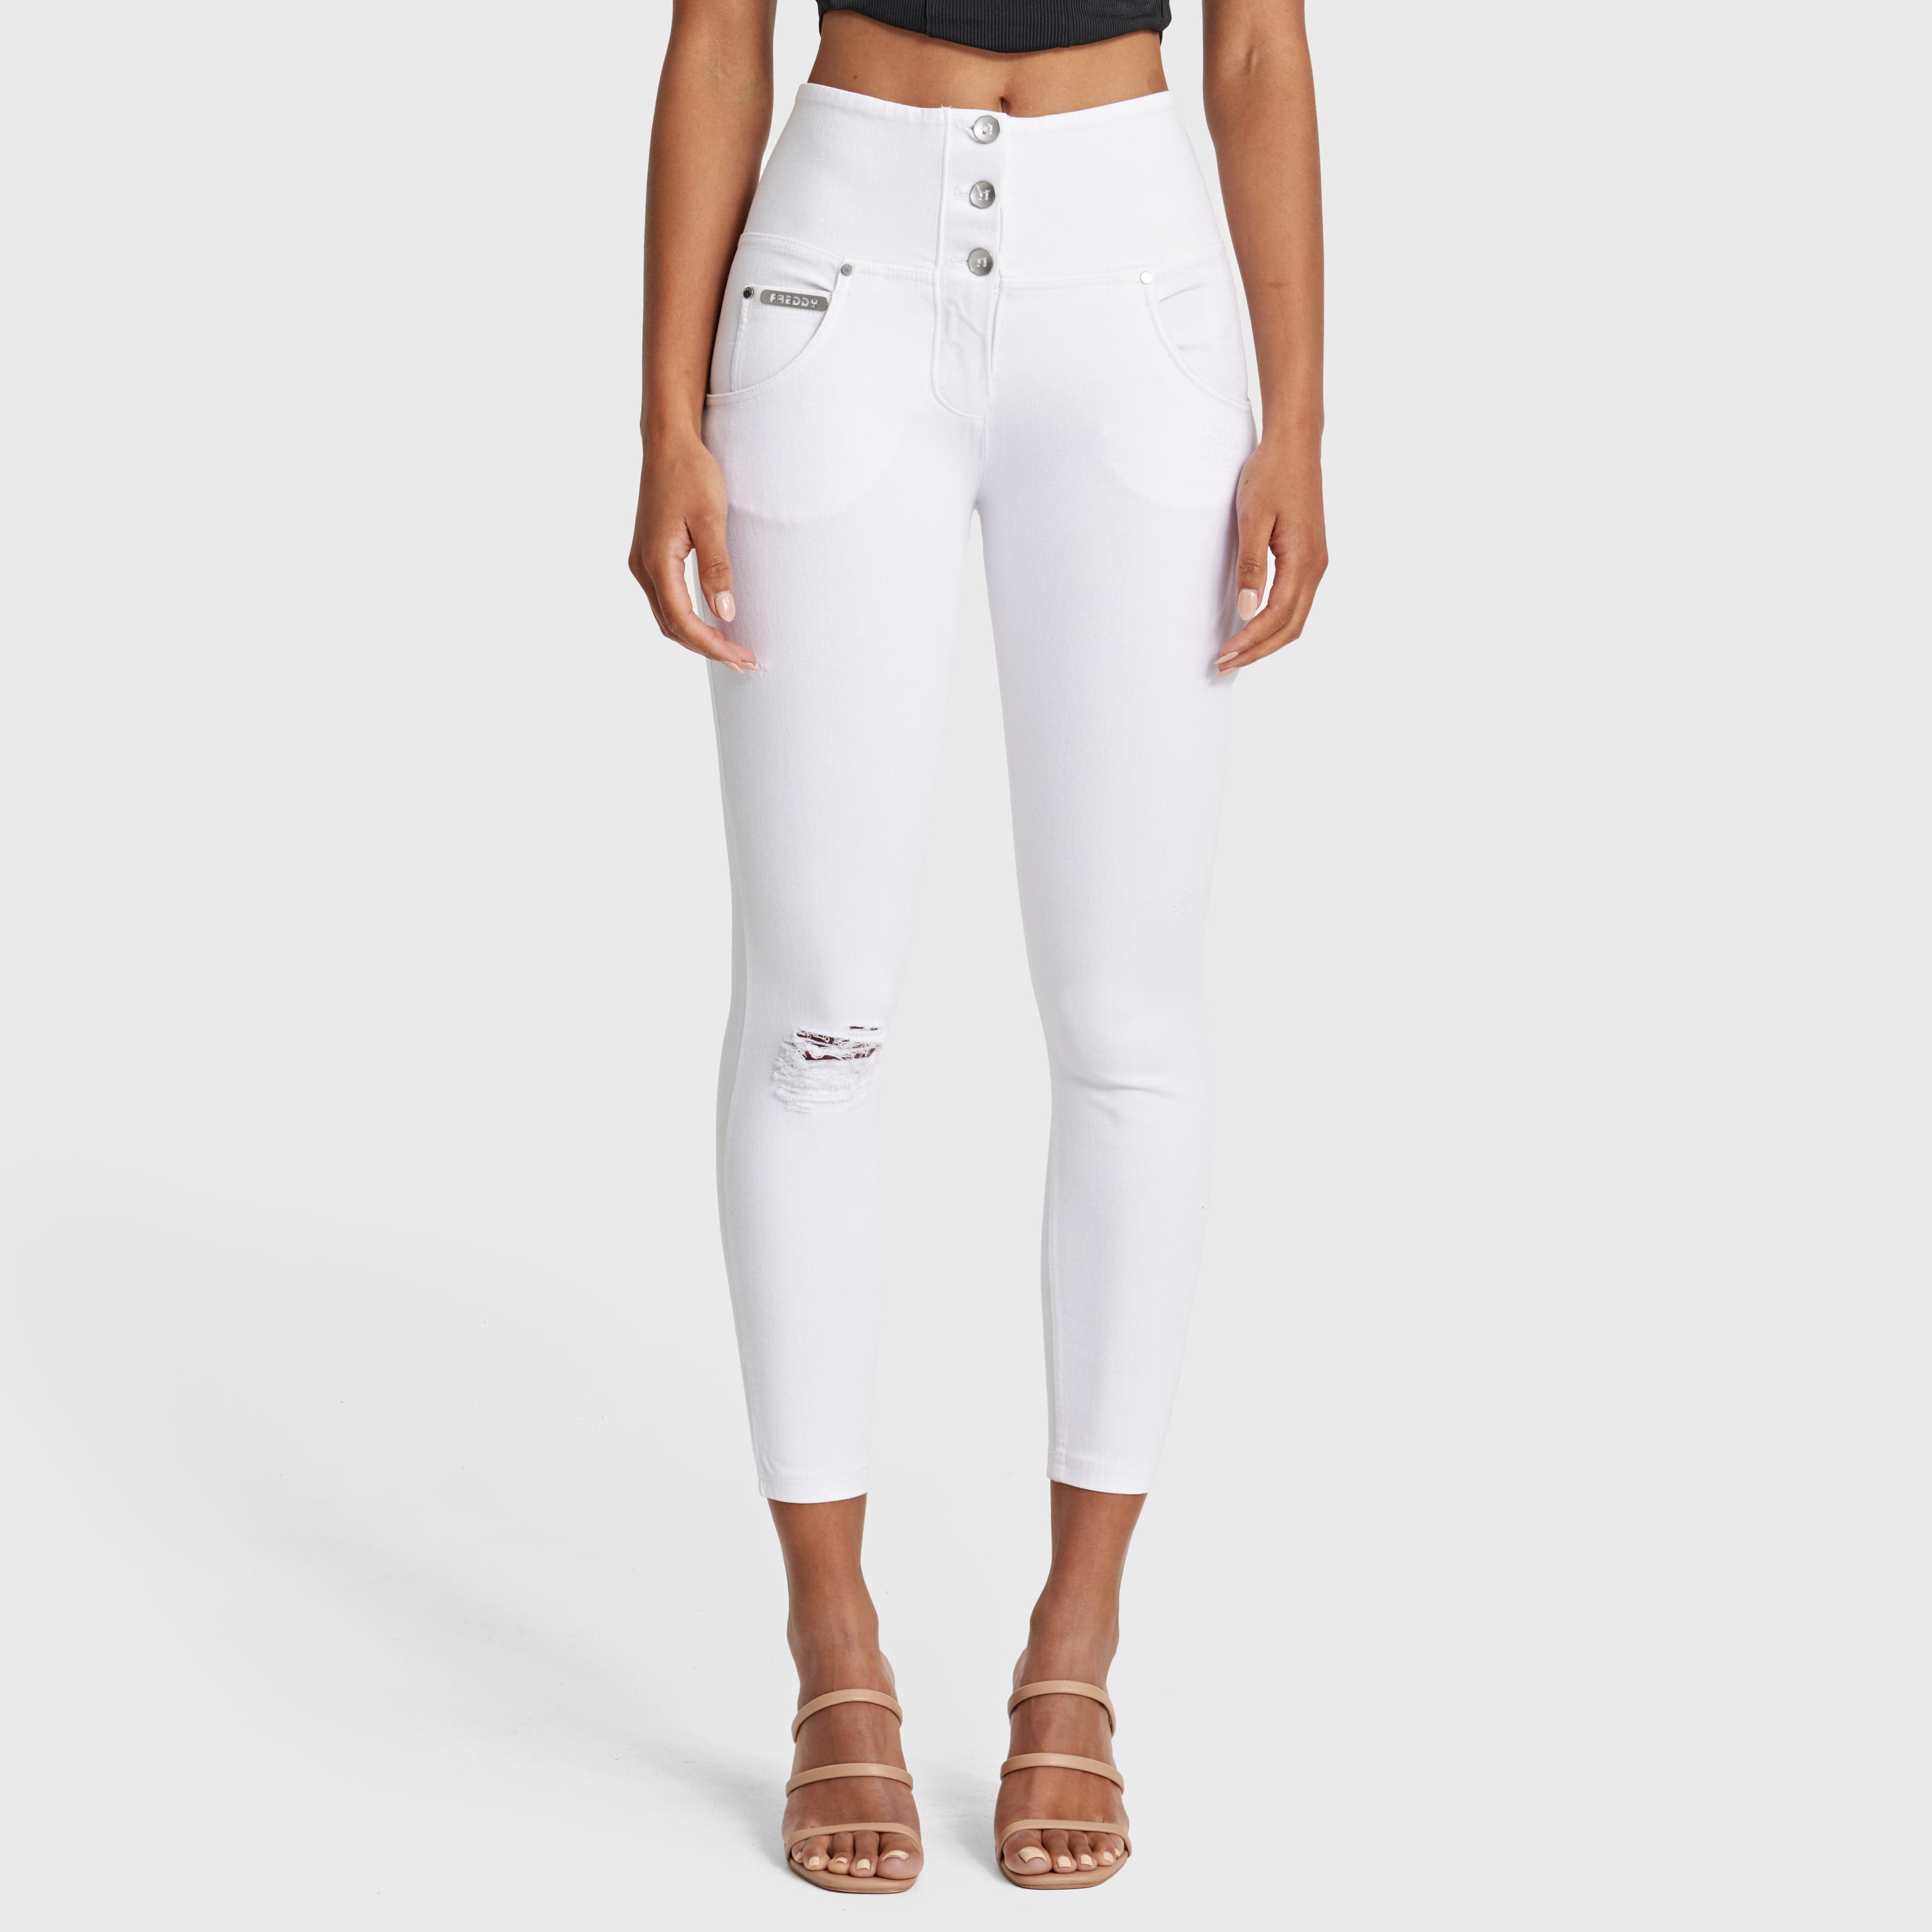 WR.UP® SNUG Distressed Jeans - High Waisted - 7/8 Length - White 3